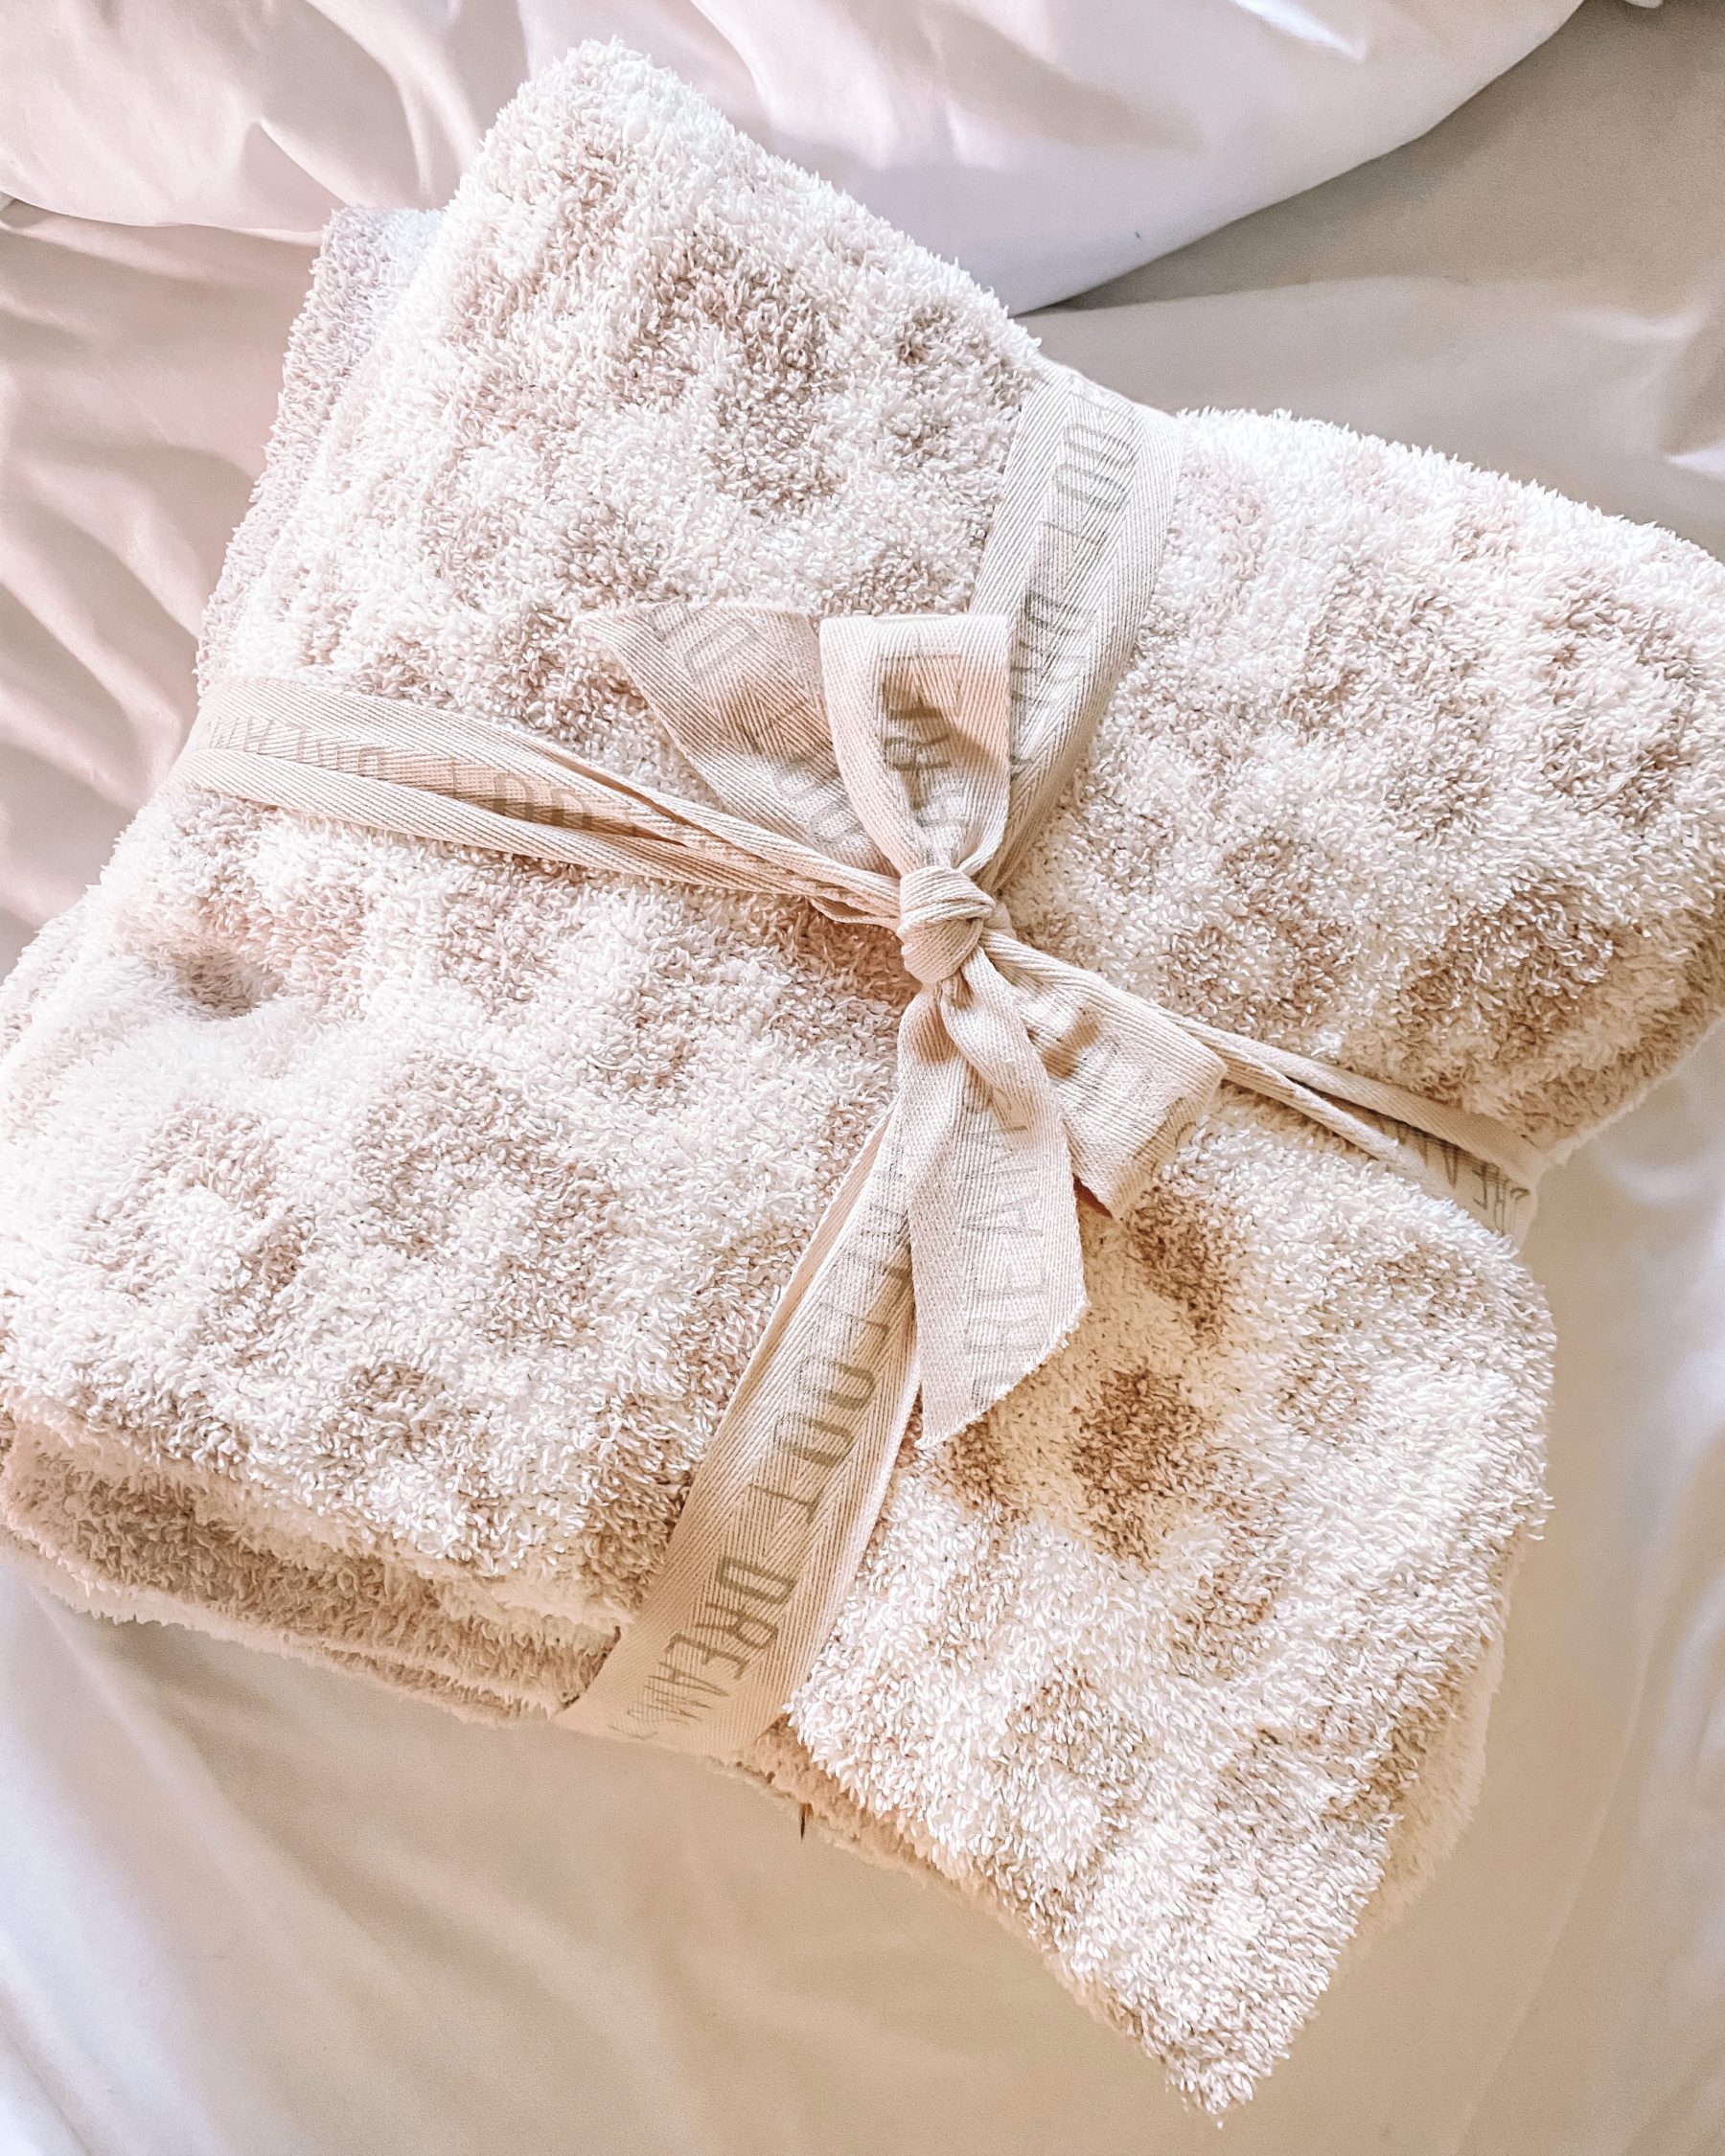 cute & little | dallas petite fashion blog | nordstrom anniversary sale 2020 nsale | barefoot dreams in the wild leopard throw blanket | Nordstrom Anniversary Sale by popular Dallas petite fashion blog, Cute and Little: image of a Barefoot Dreams In the Wild Throw blanket. 